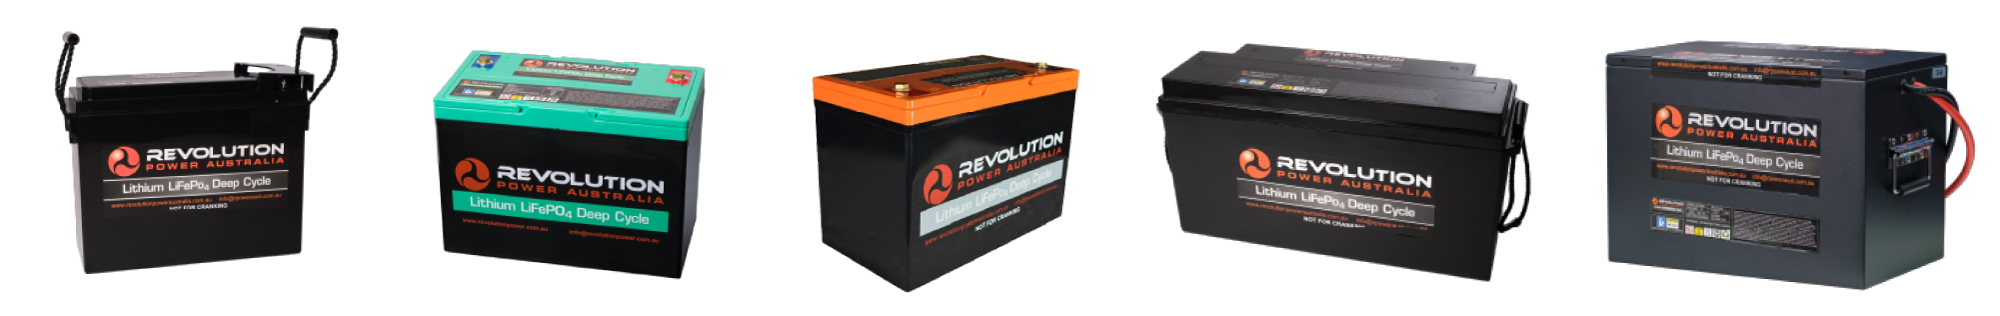 Revolution Power Battery Range About Page